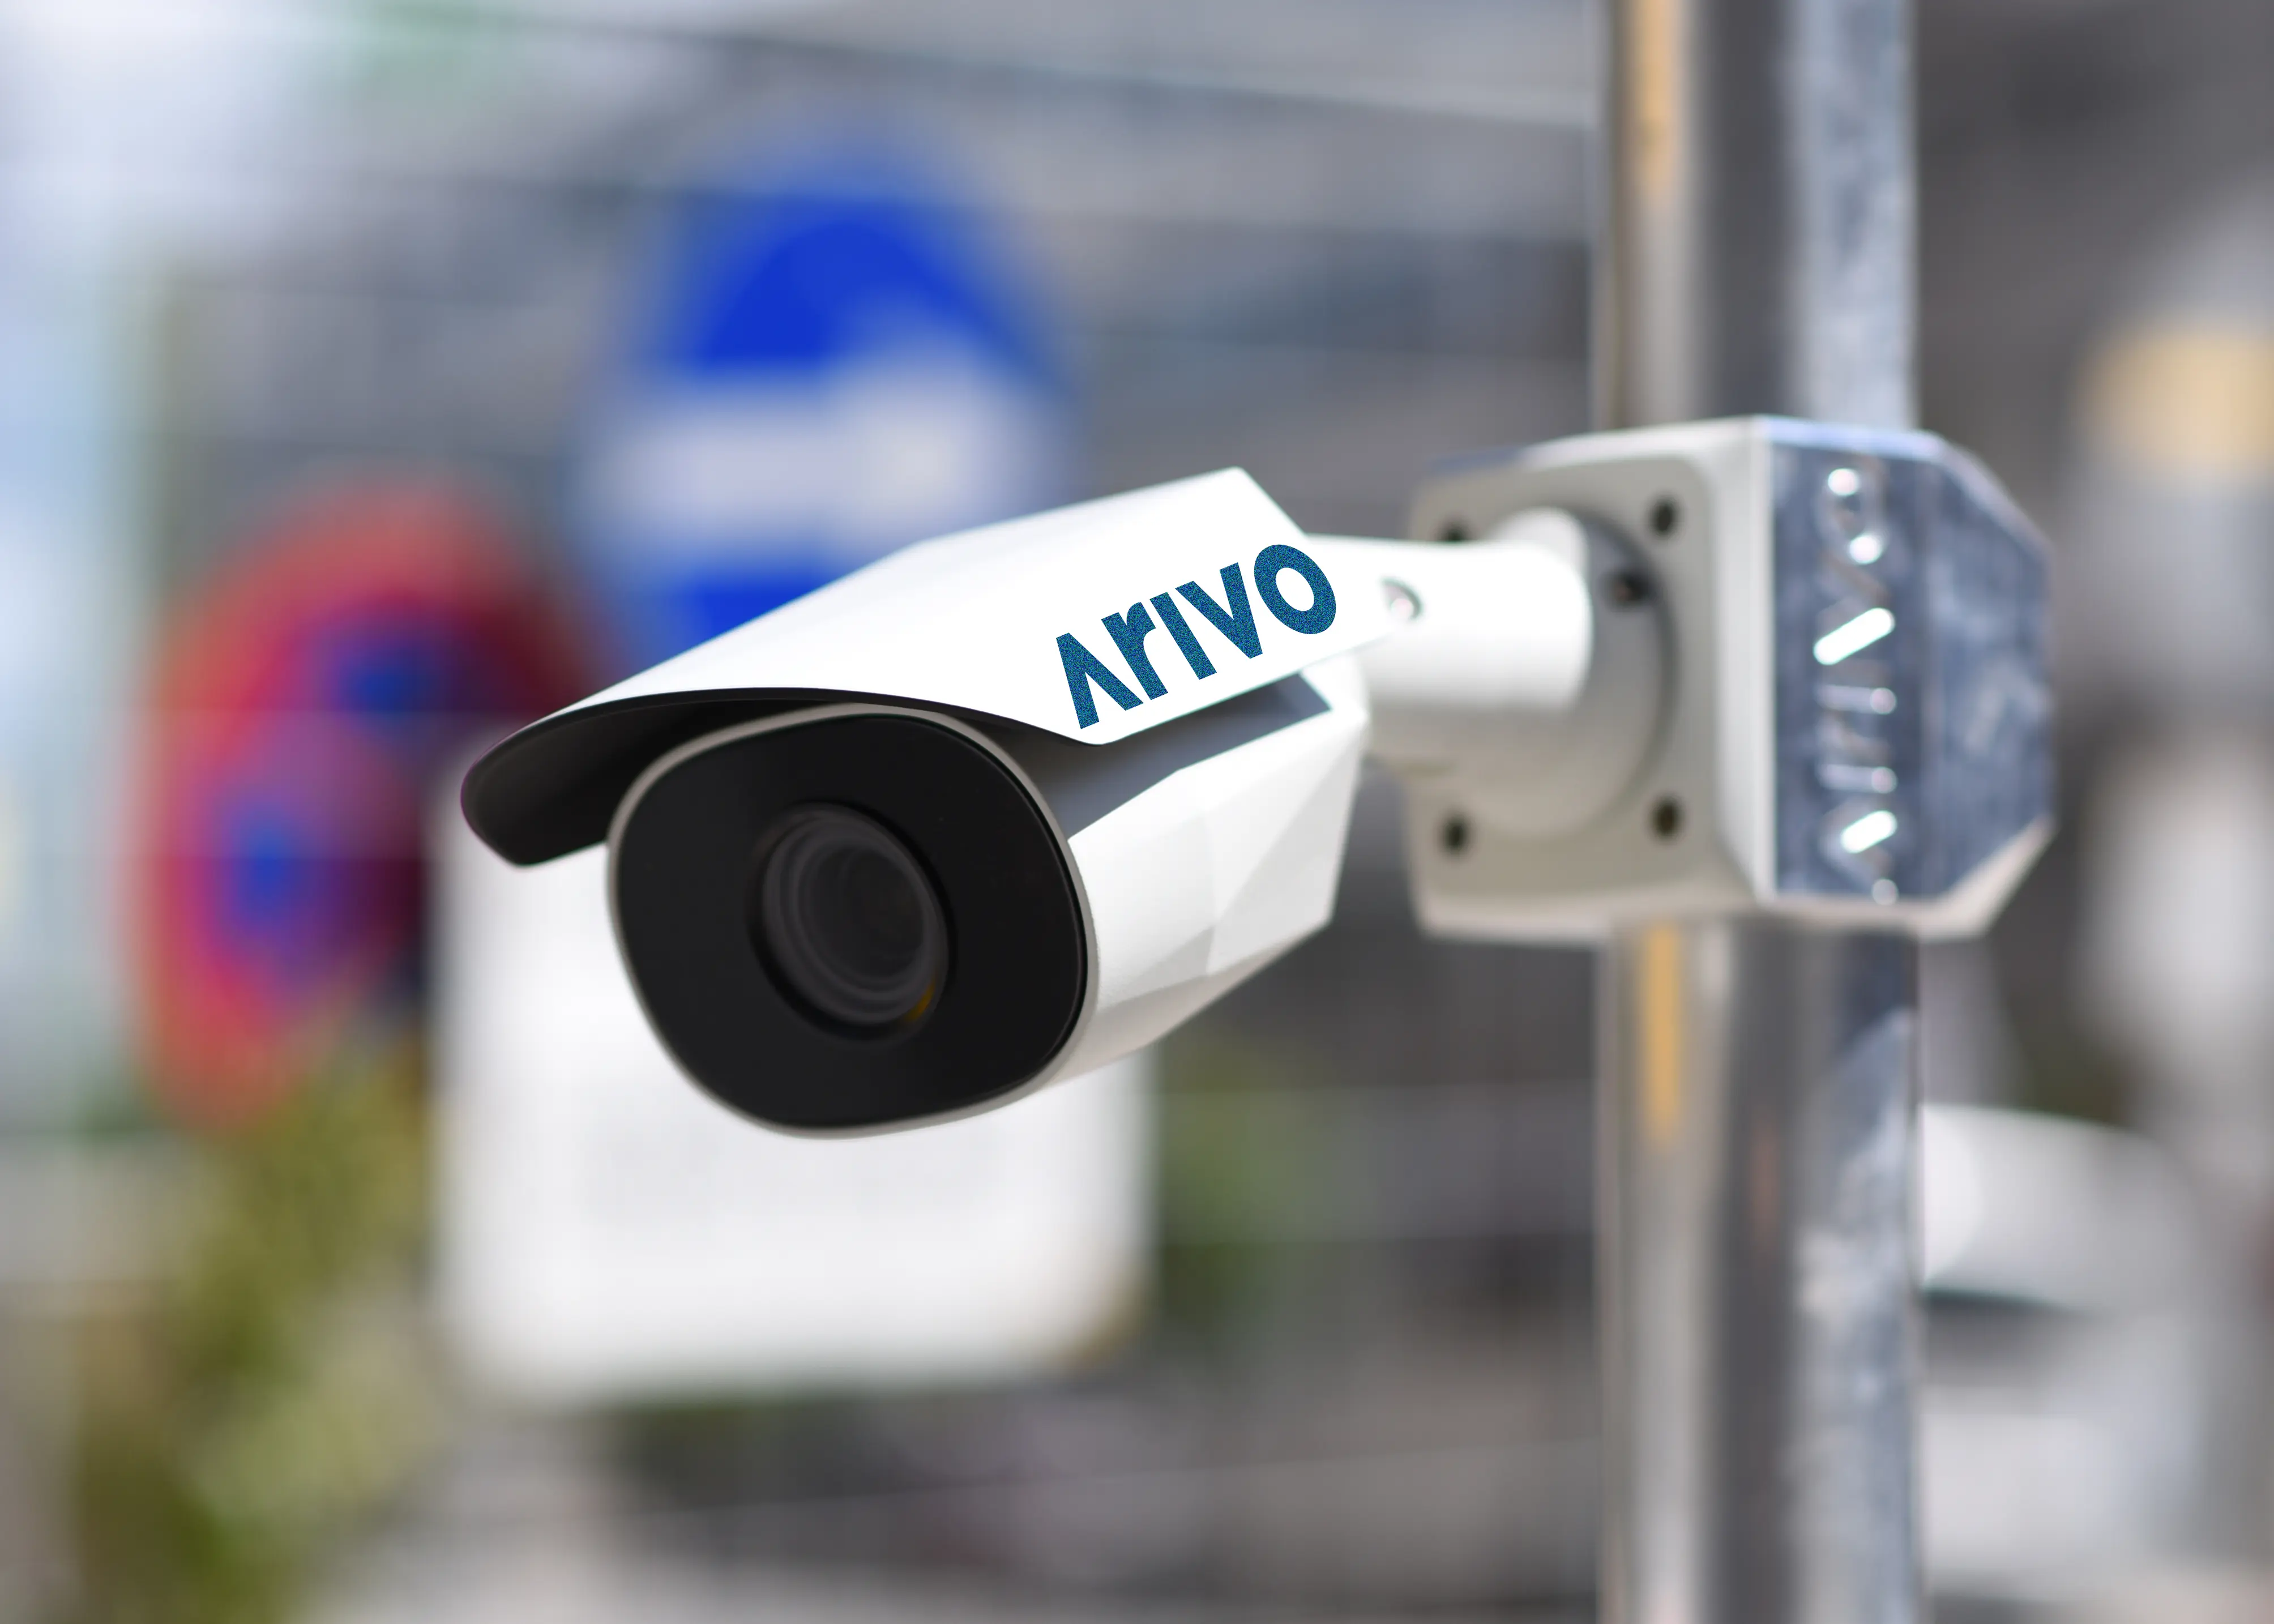 Licence plate recognition (lpr) camera from Arivo